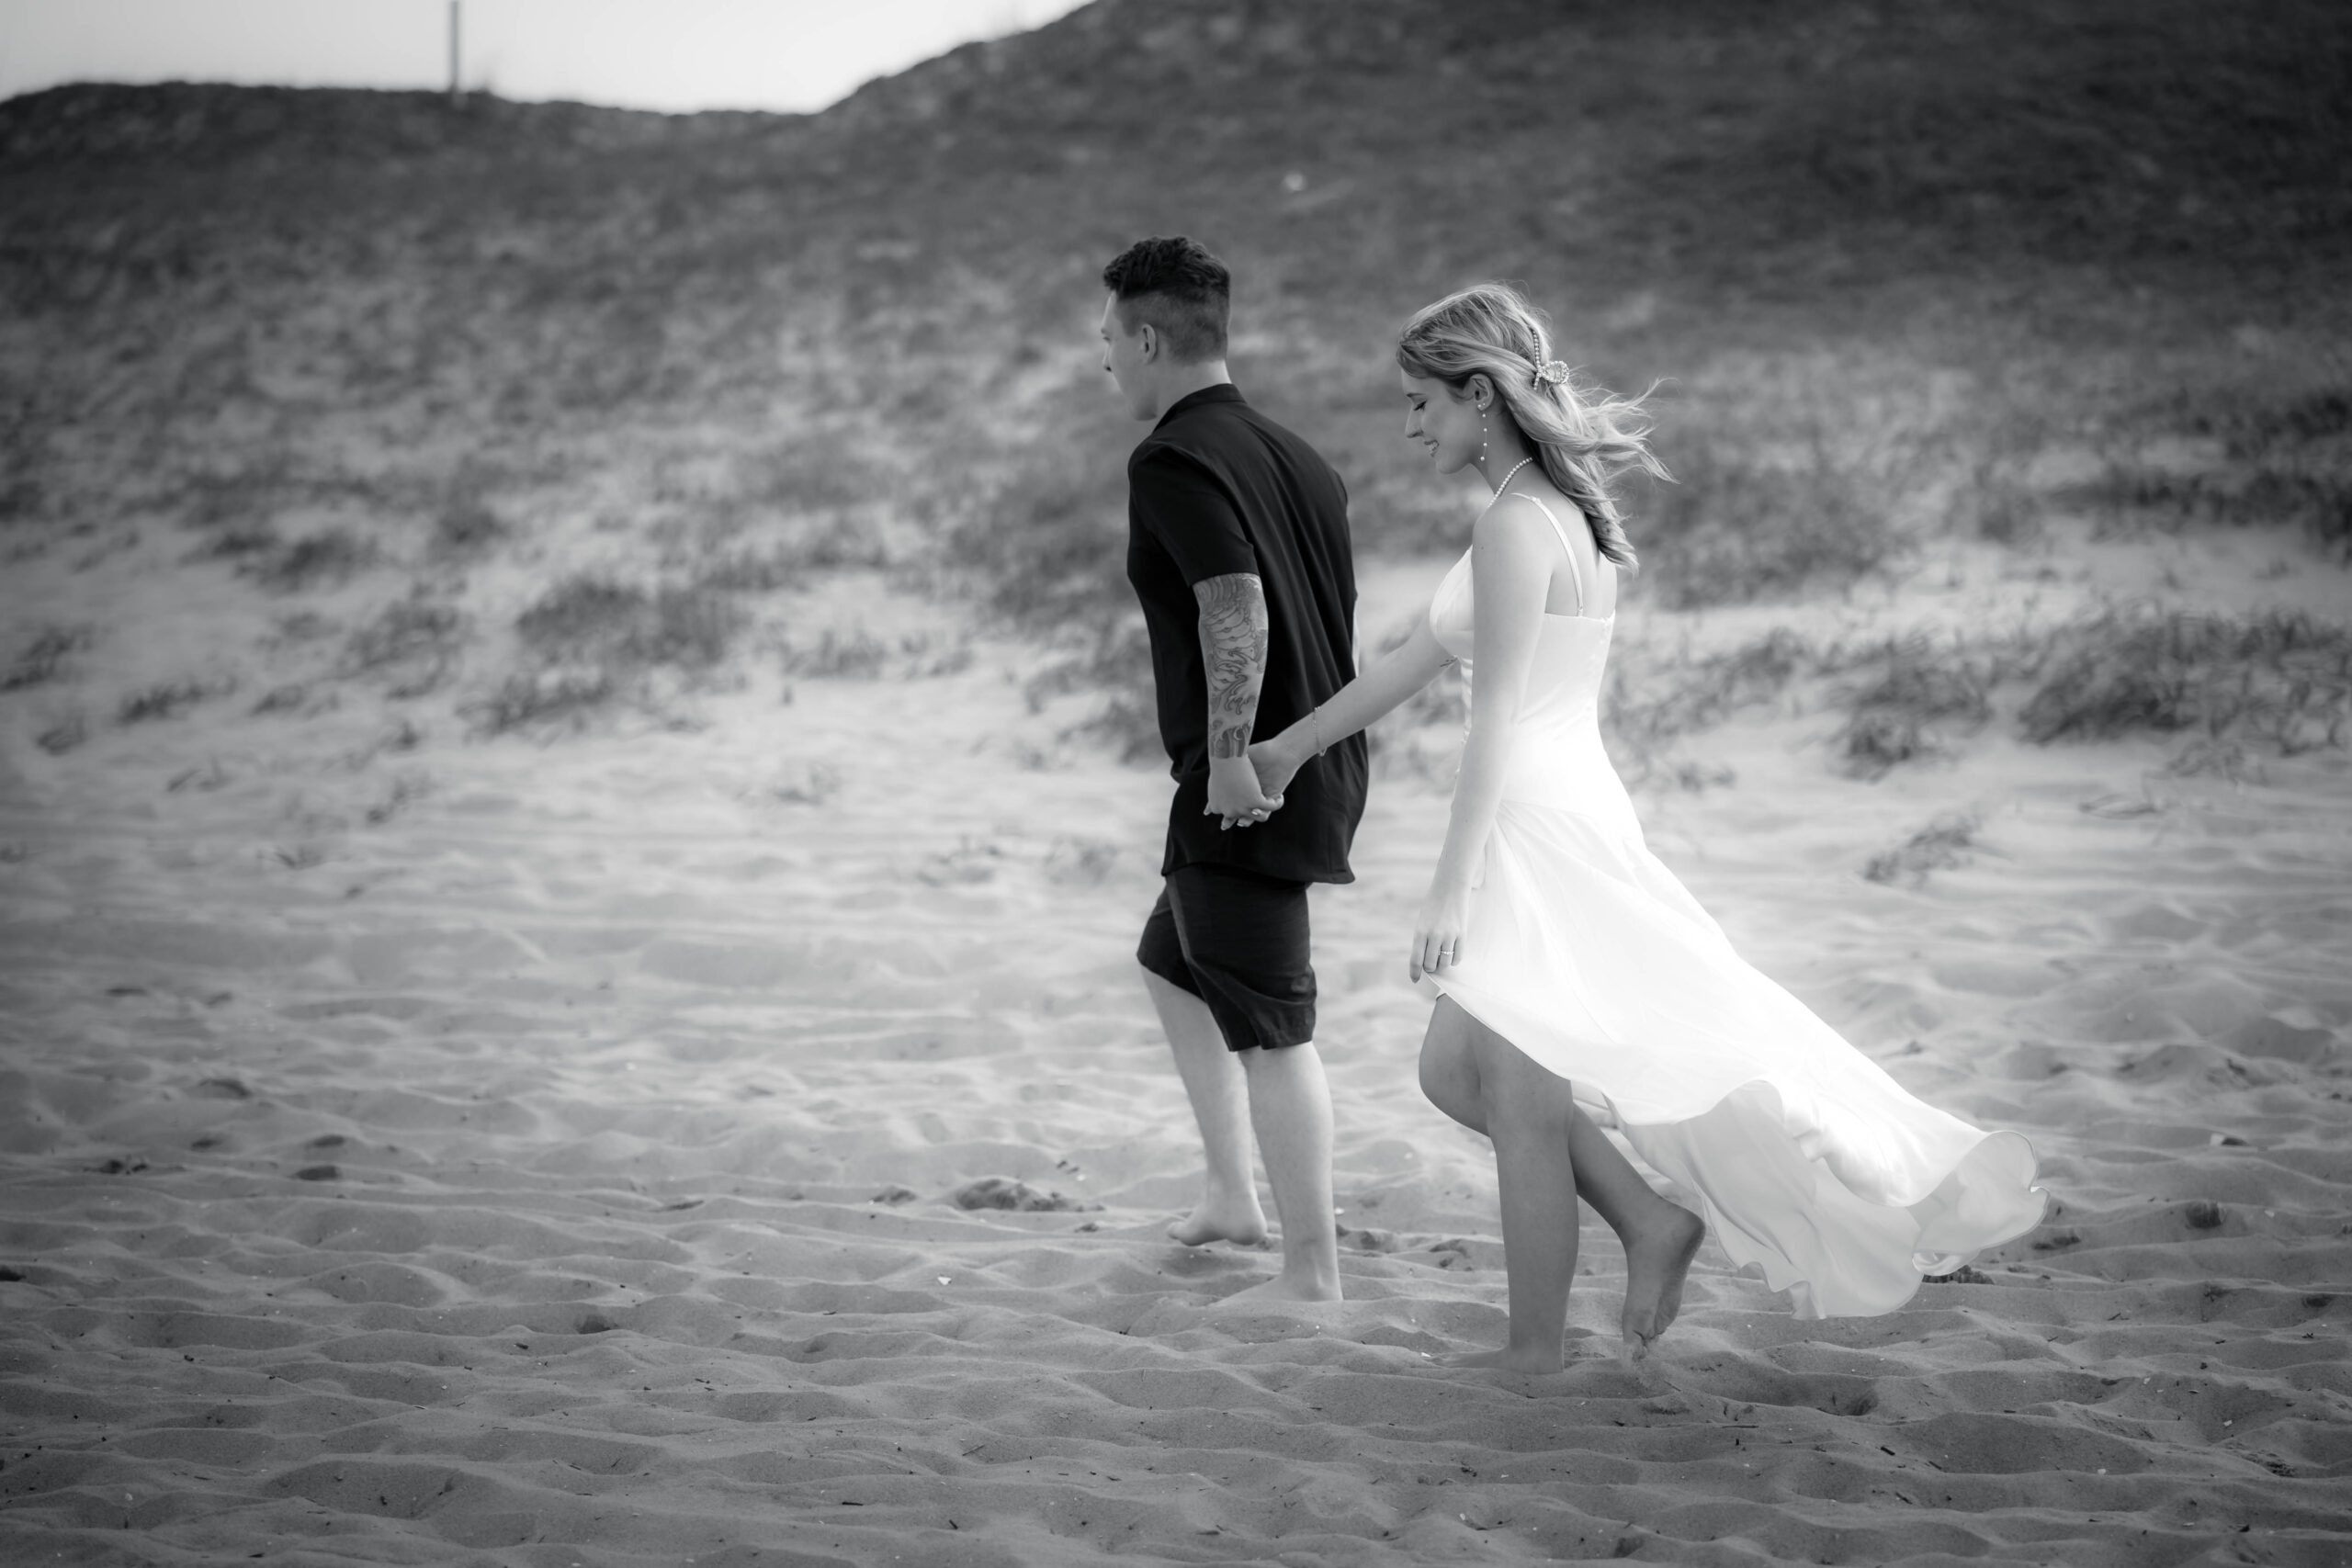 Black and white photo of a wedding day Bride and Groom. Bride dressed in a white gown flowing in the breeze of the ocean. Groom dressed in casual black. Bride and Groom walking hand in hand on the beach near the dunes.